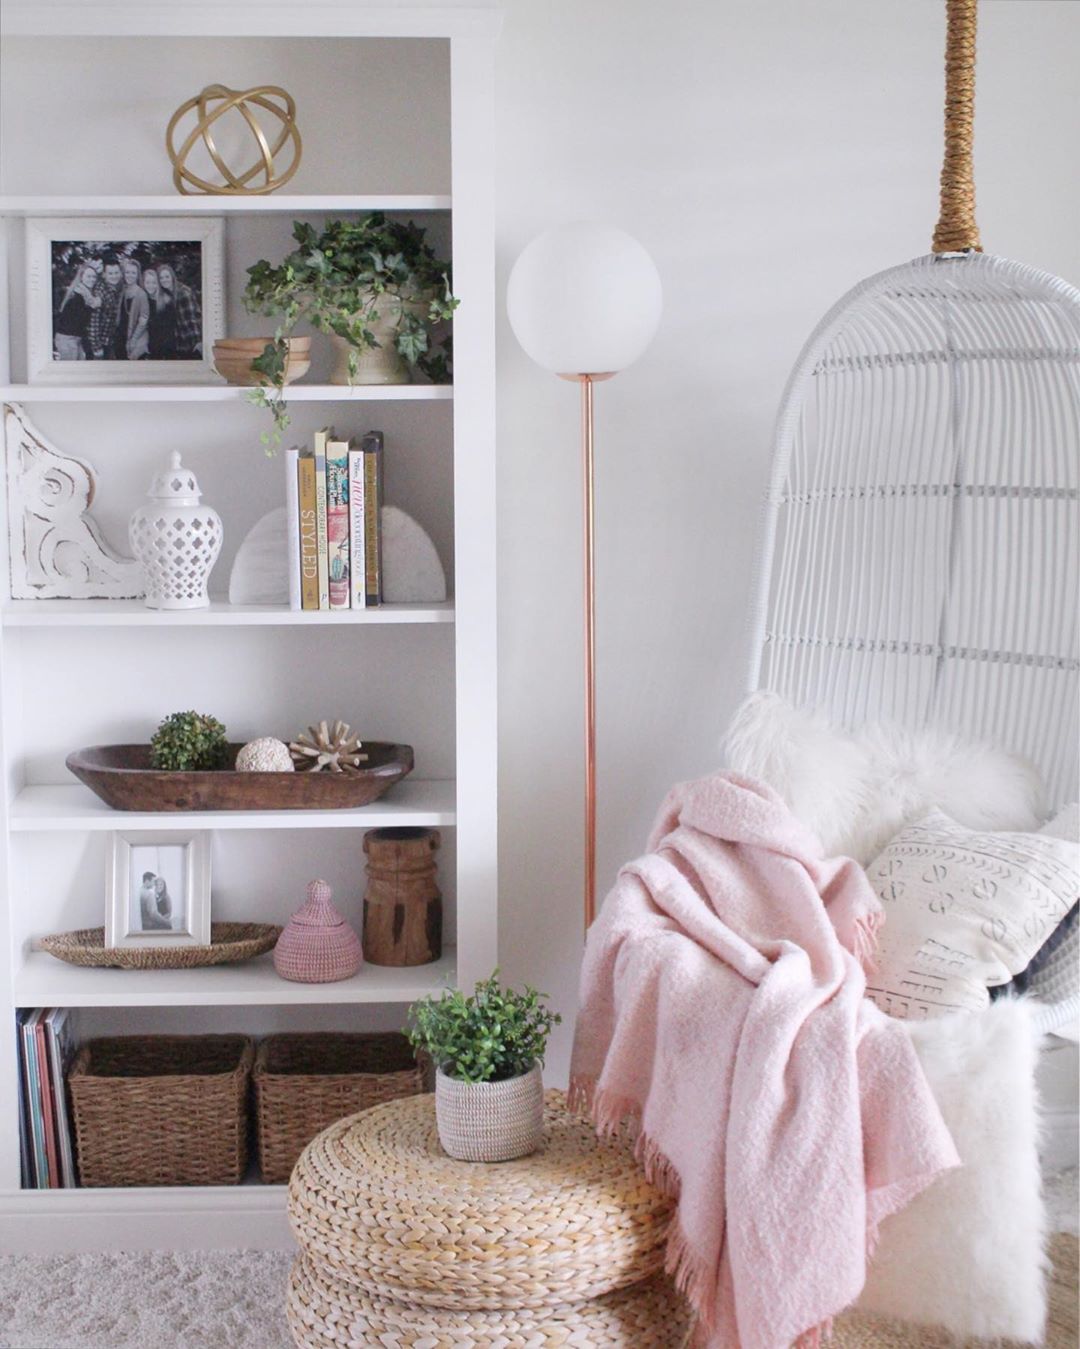 Cozy Reading Nook with a Hanging Basket Chair Next to a Bookshelf. Photo by Instagram user @simplecozycharm